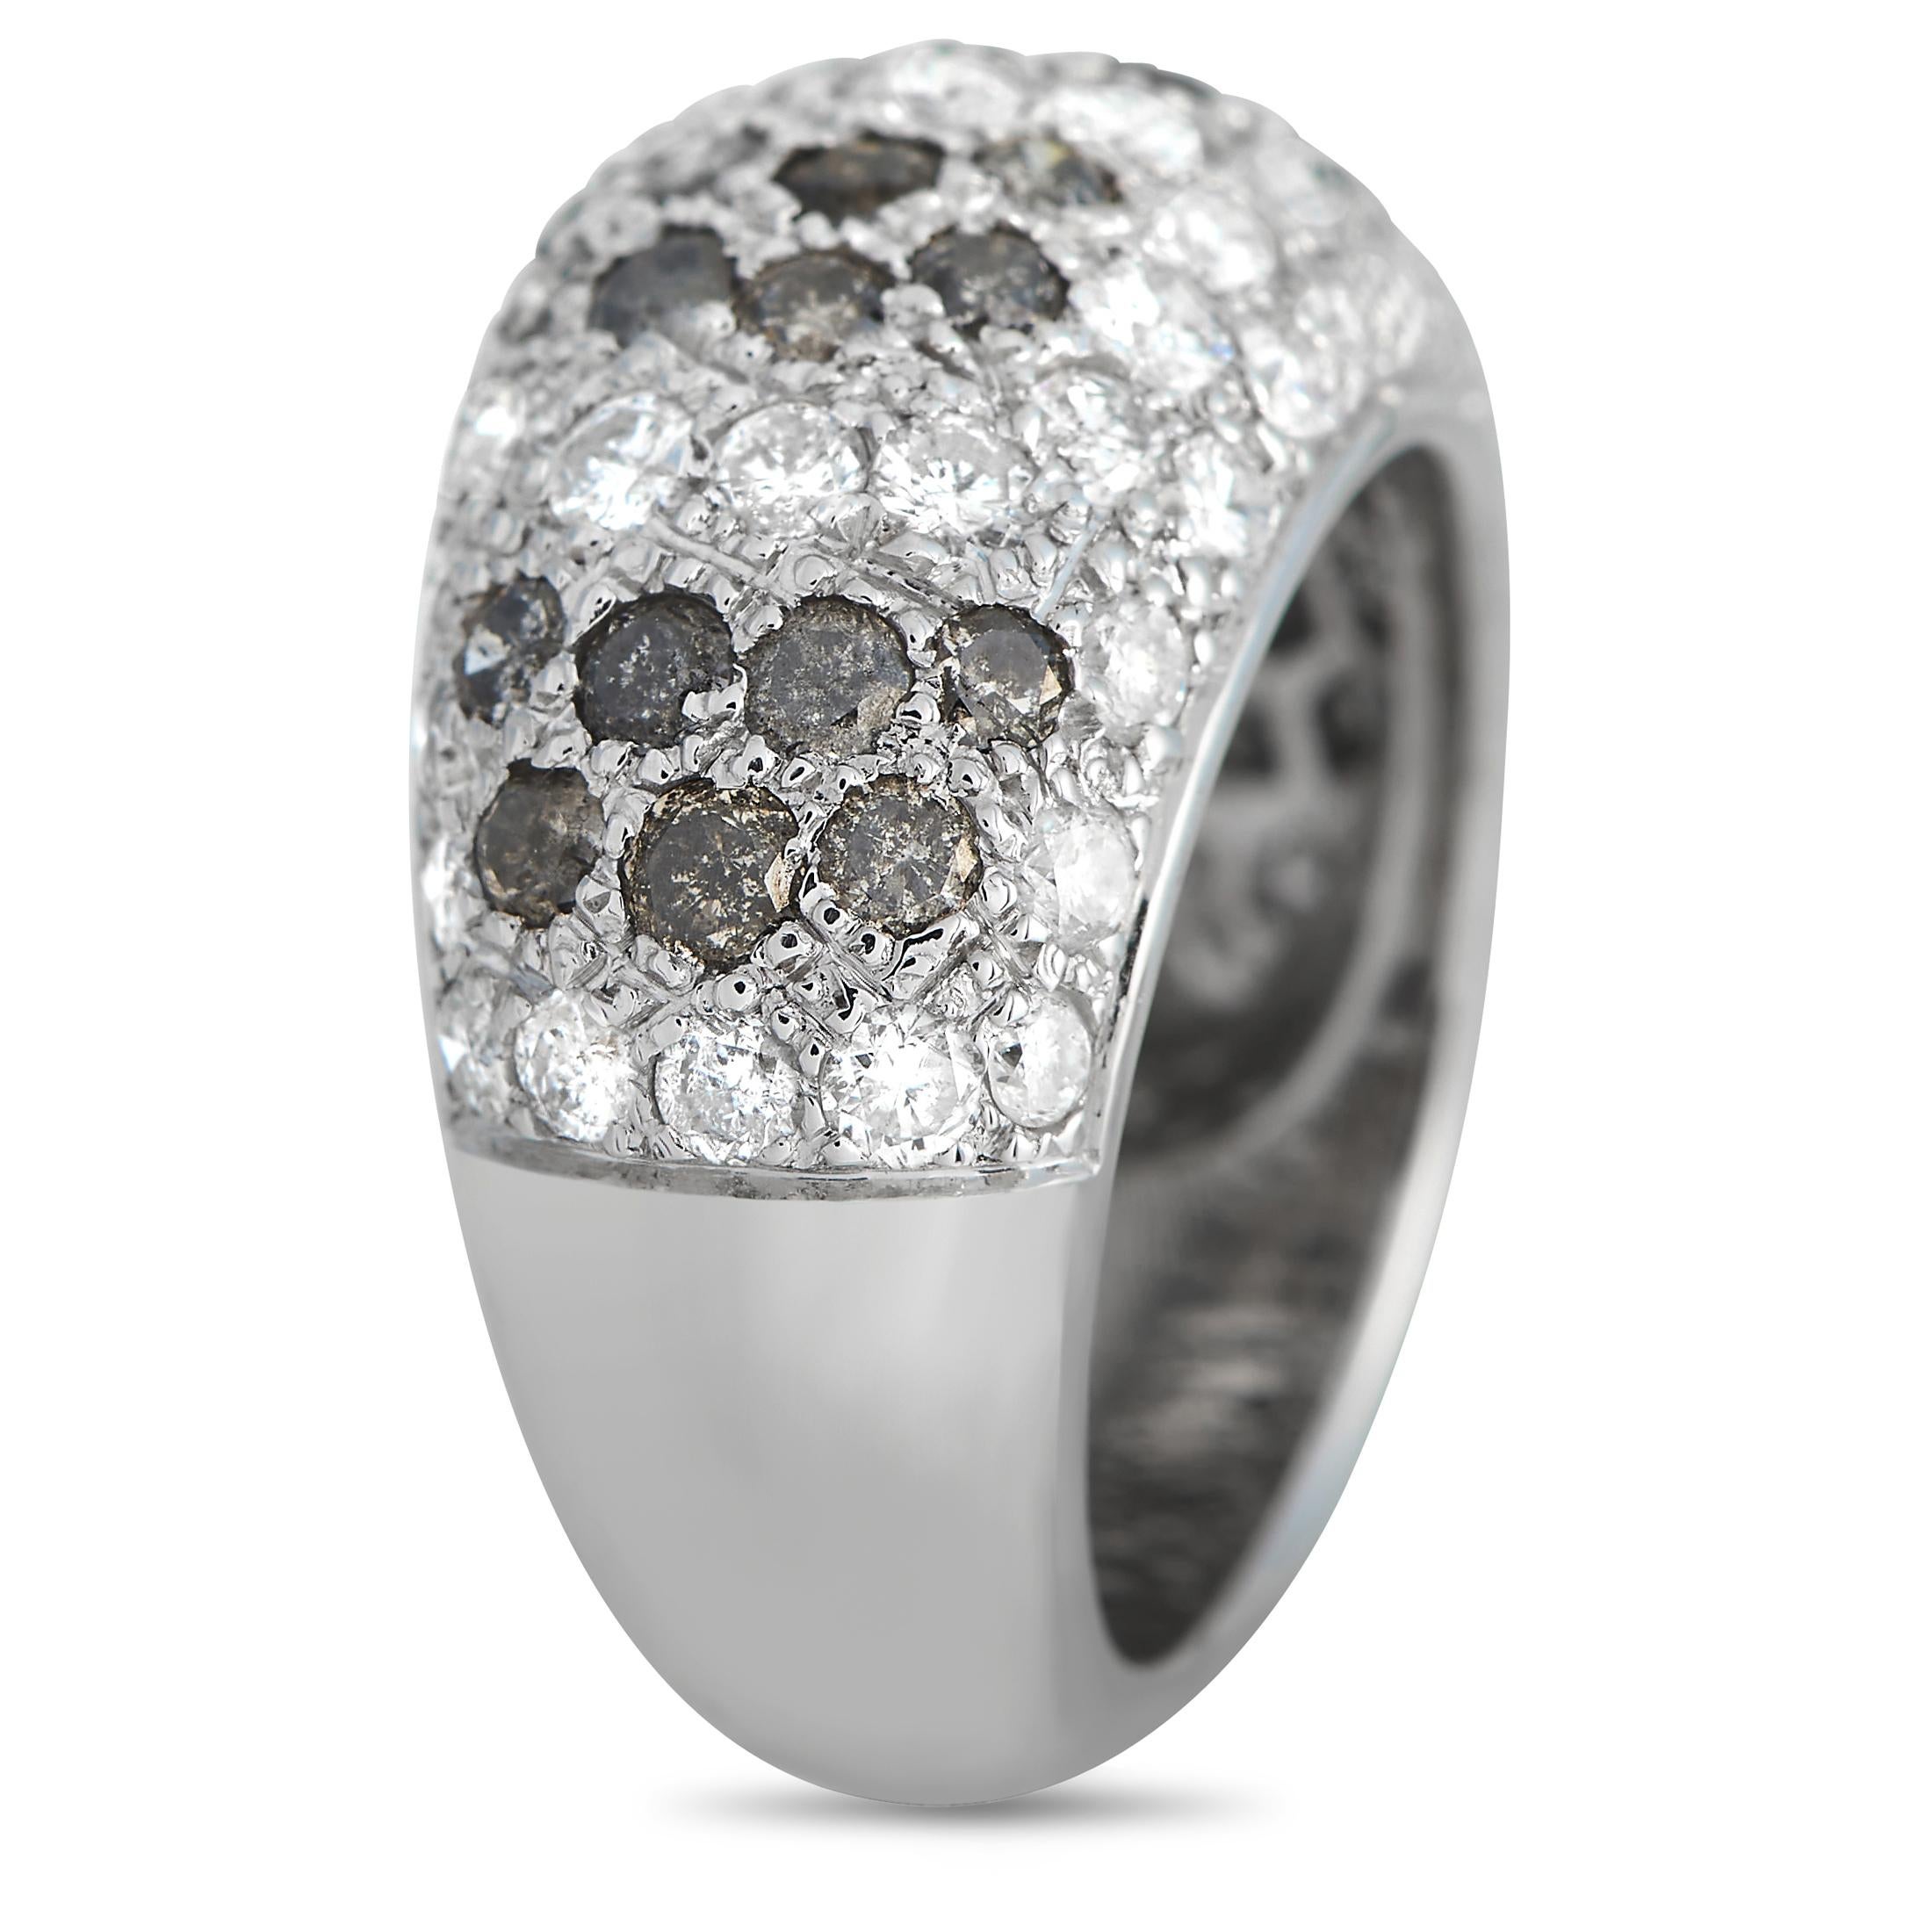 The Cartier Sauvage Mtissage diamond ring is sure to impress. This gorgeous piece indeed features a wild mix of luxury and style. The 18K white gold band bomb-shaped ring shines with pav-set brilliant white and fancy grey diamonds. The ring's top